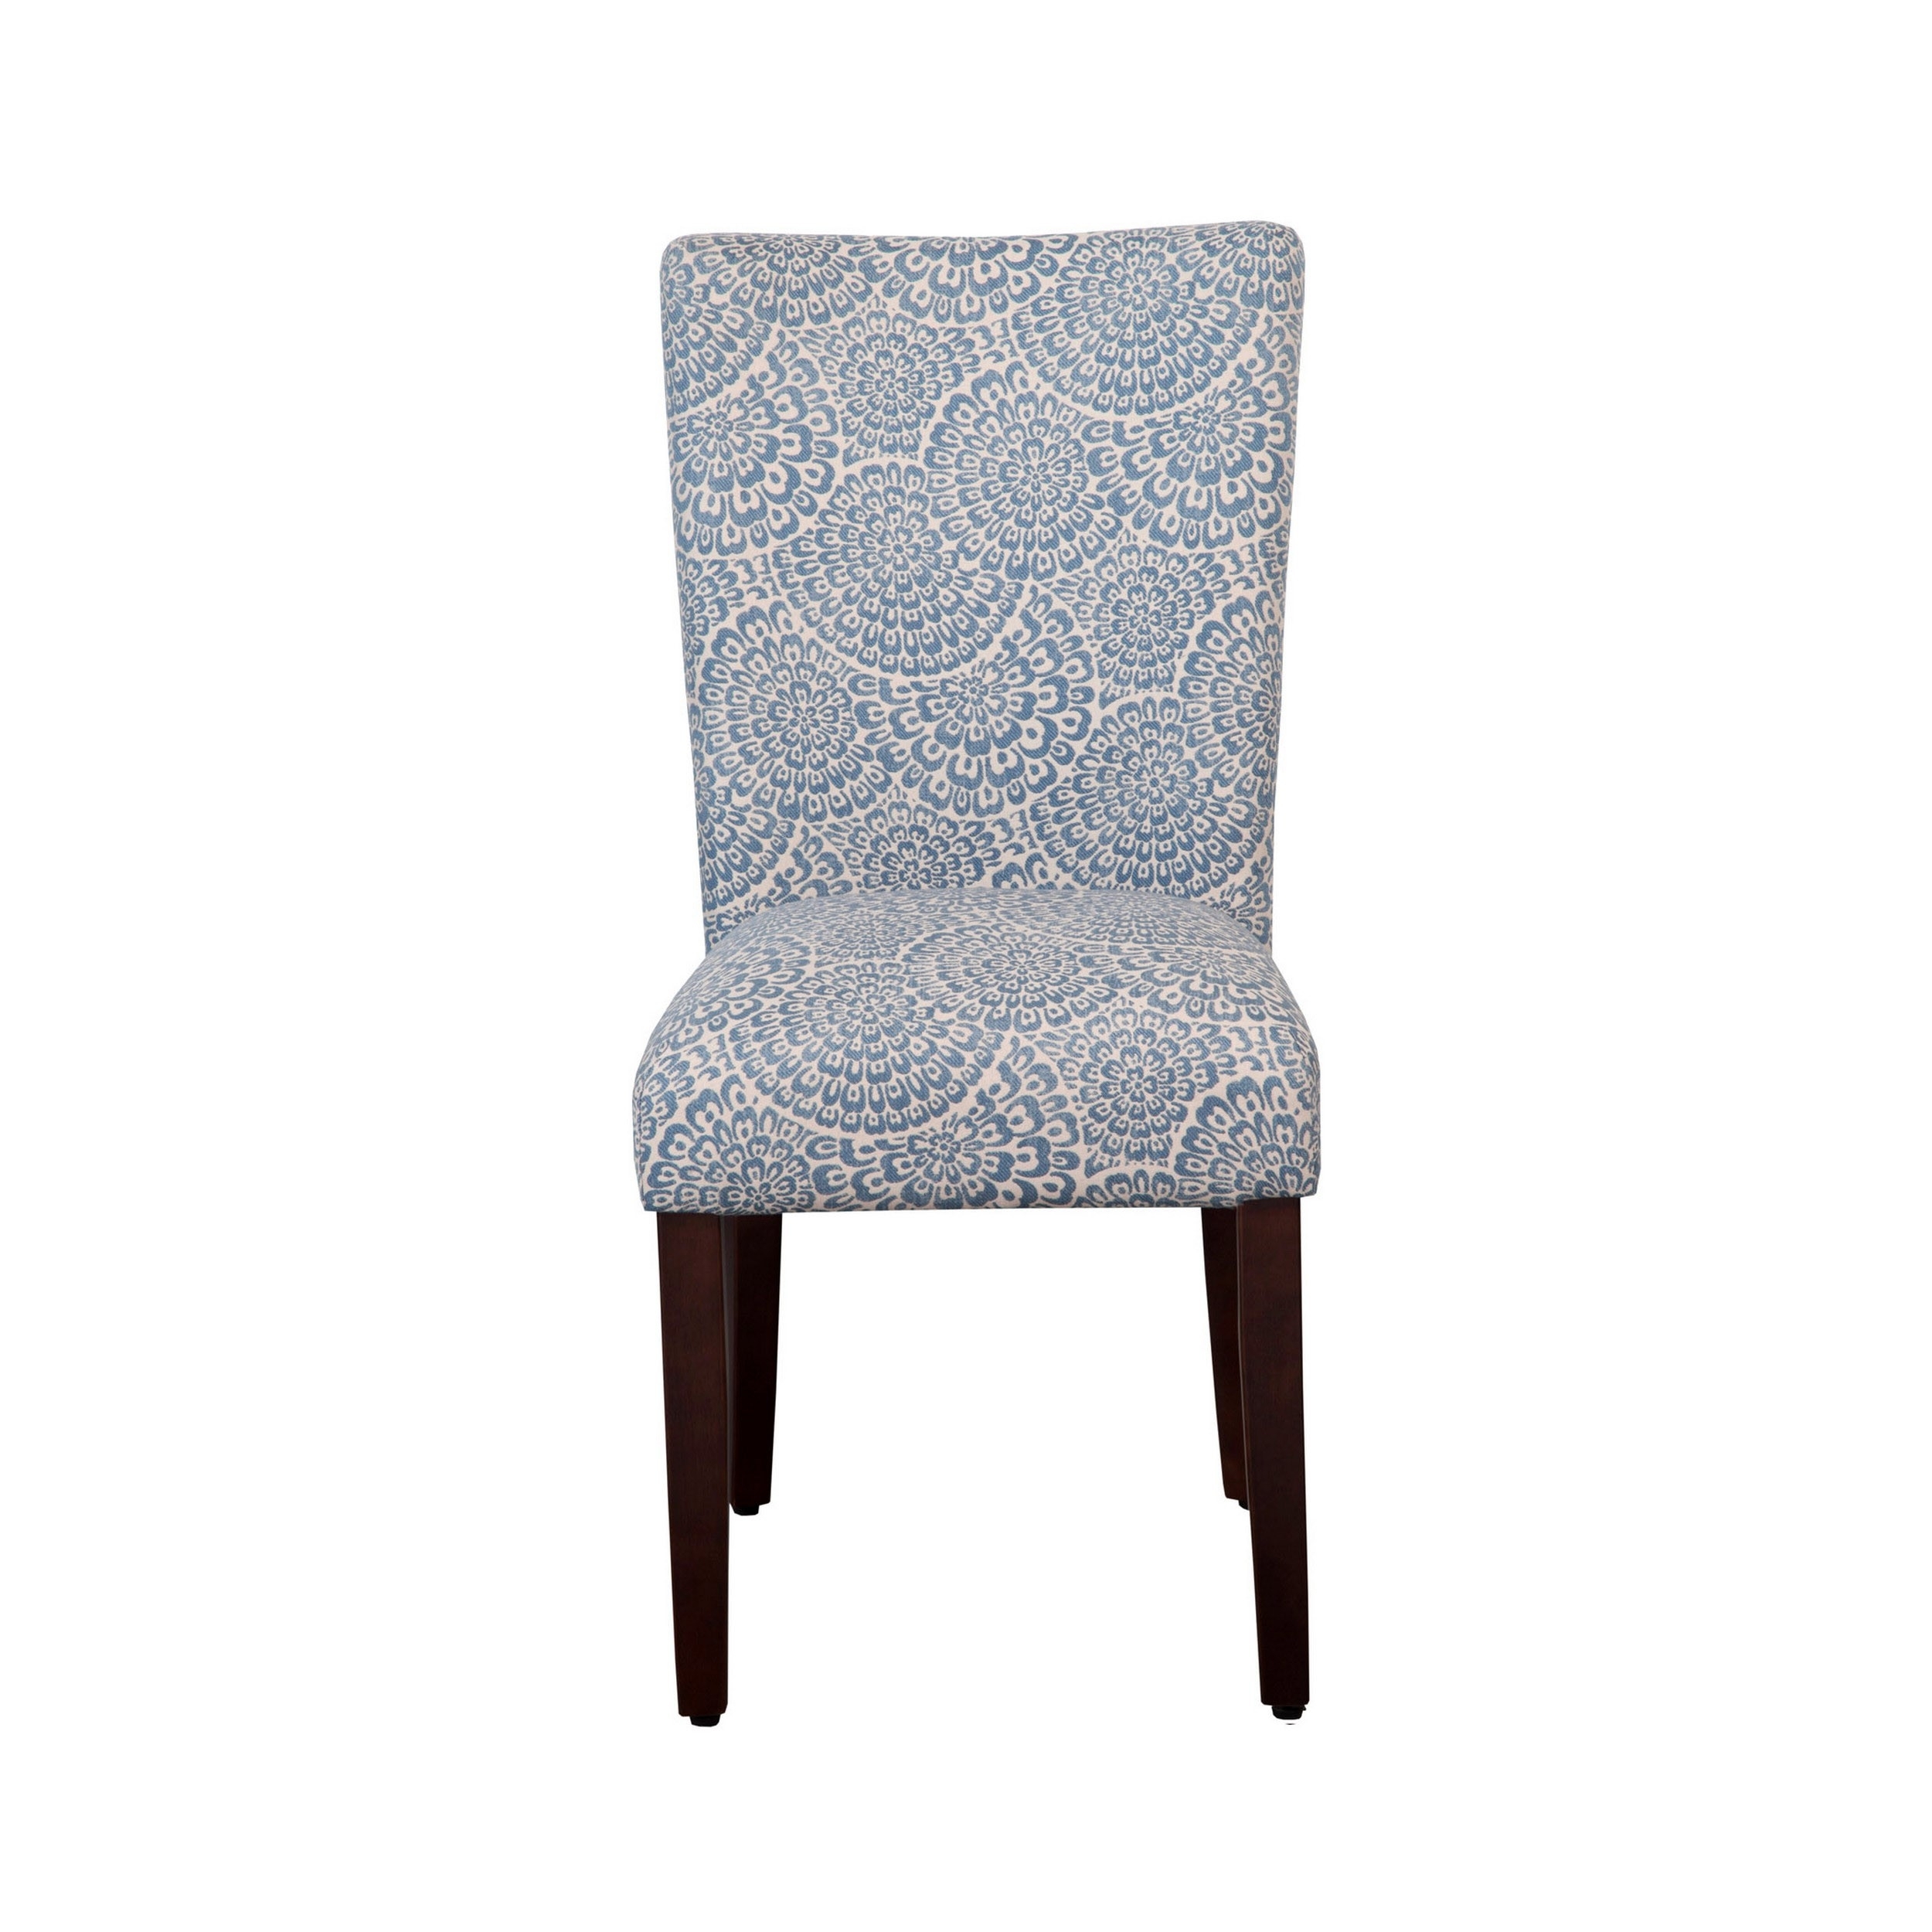 Wooden Parson Dining Chairs With Floral Patterned Fabric Upholstery, Blue And White, Set Of Two- Saltoro Sherpi